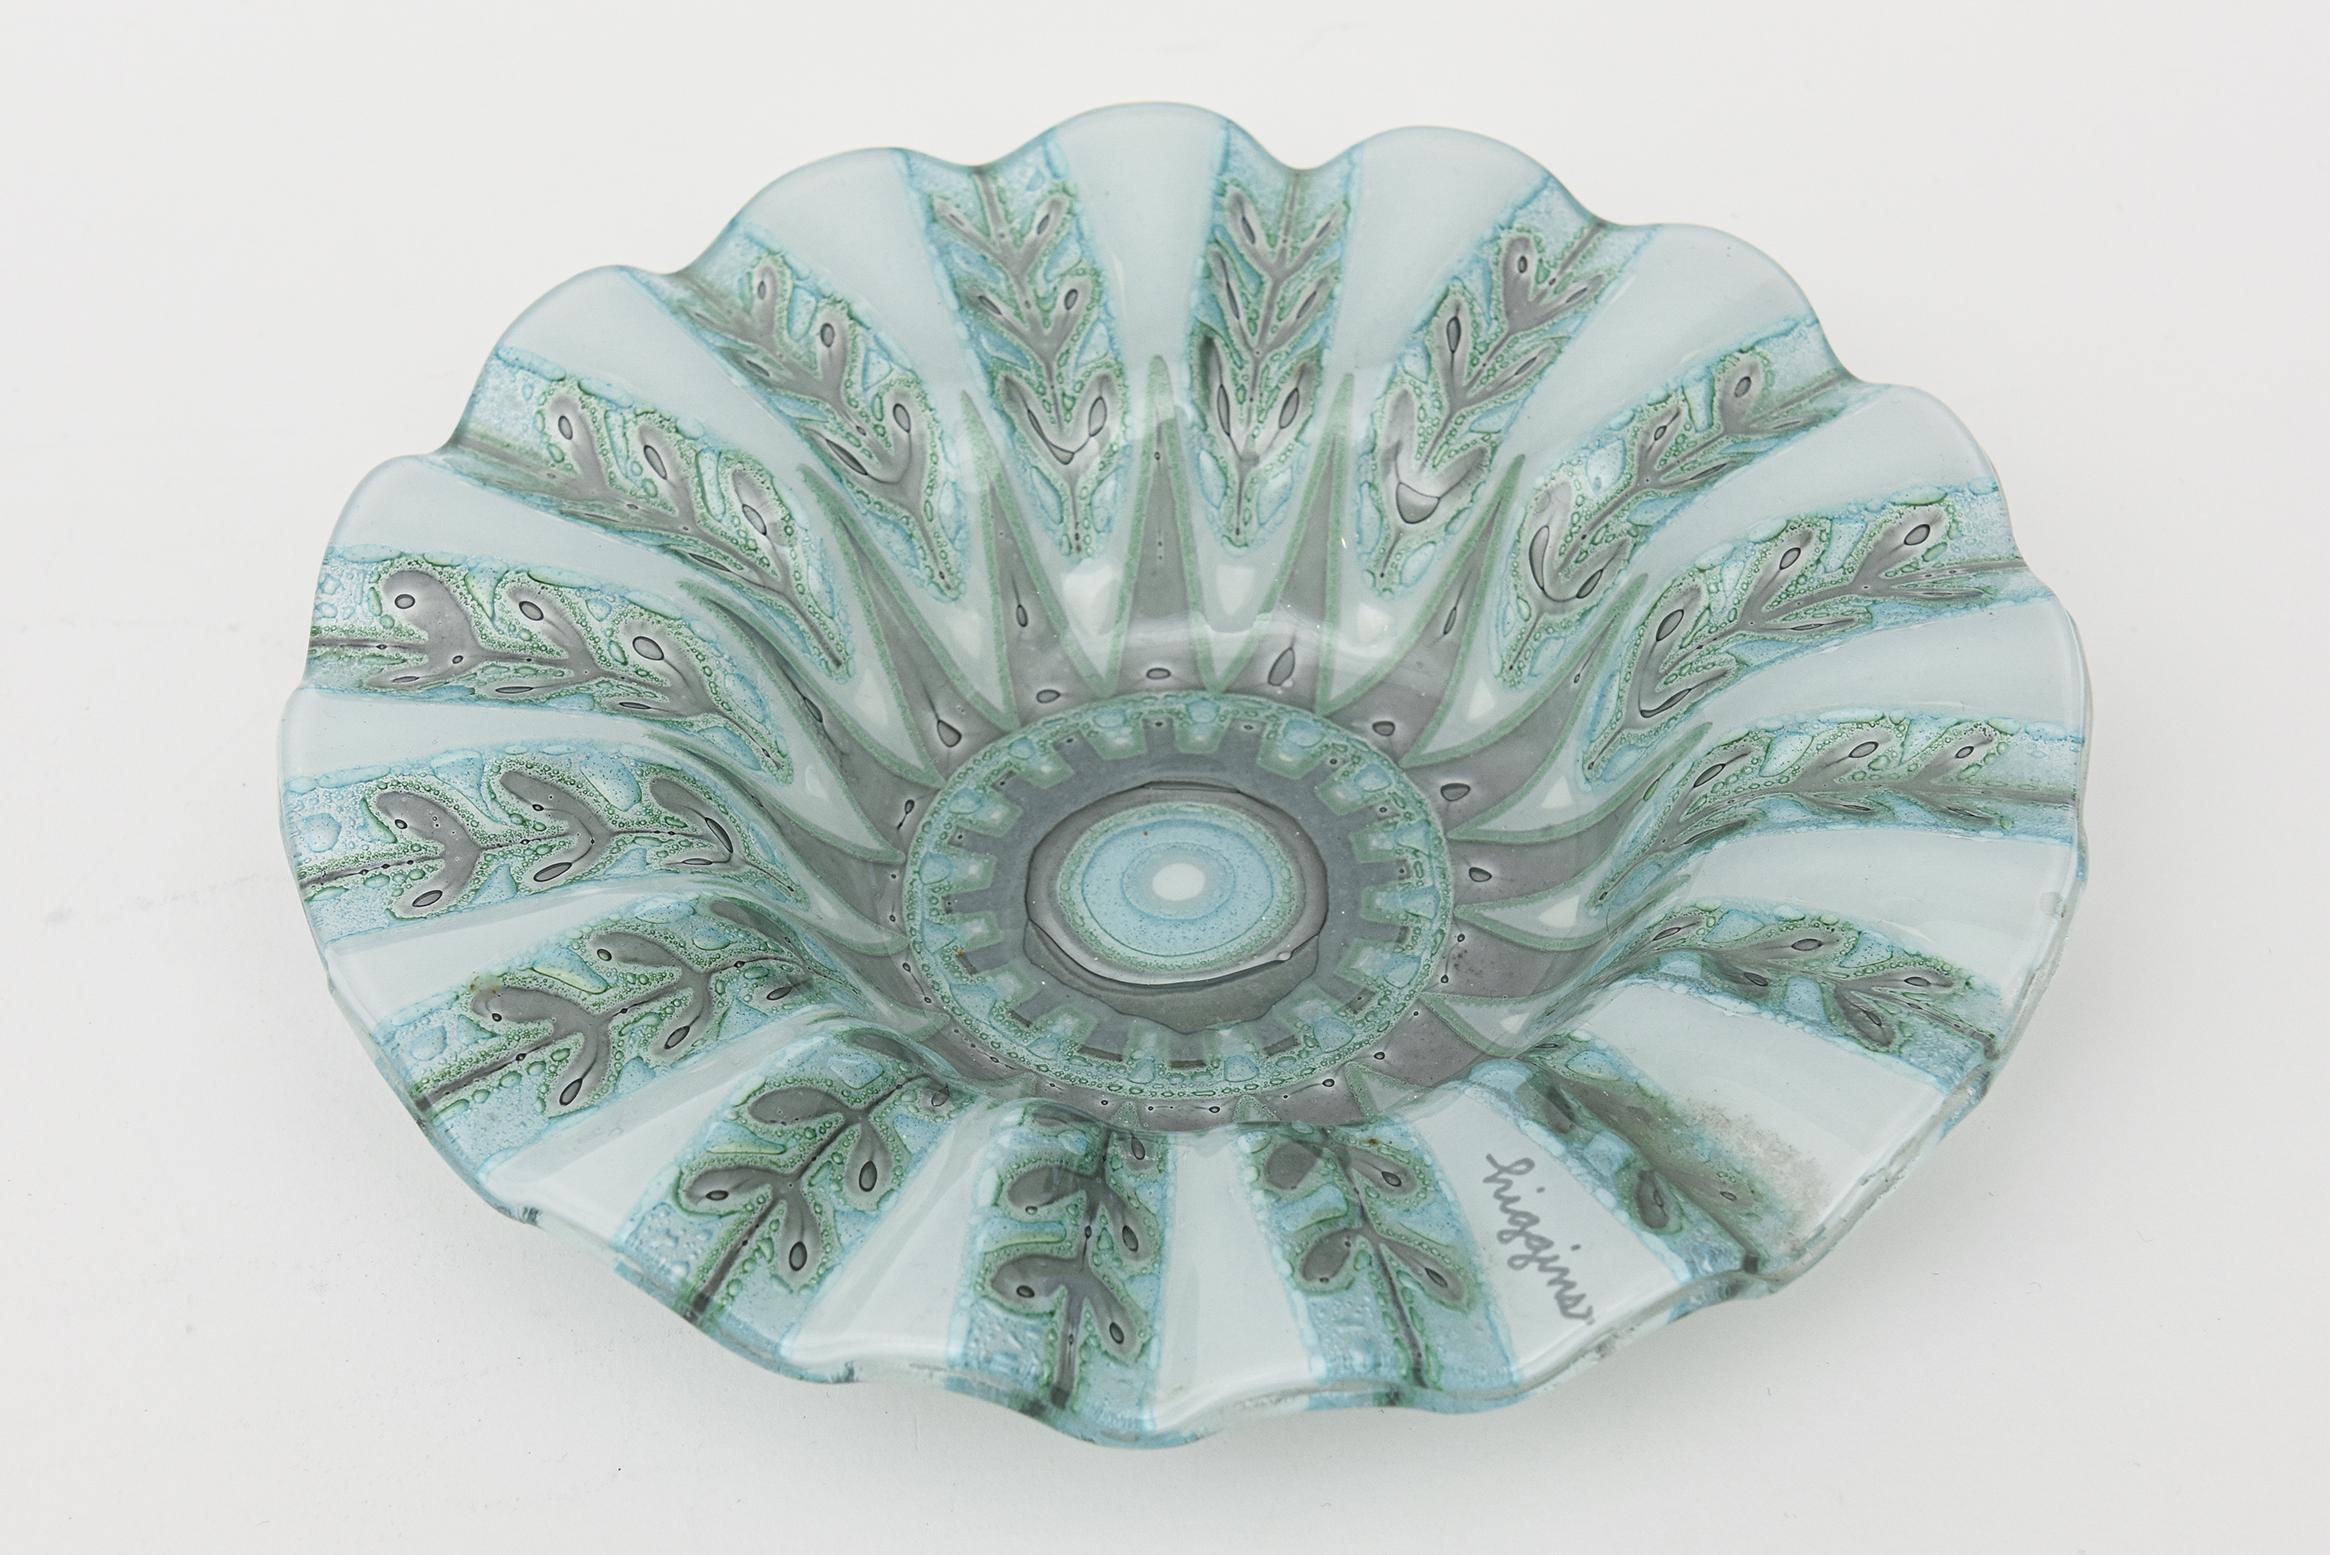 Vintage Signed Higgins Fused Glass Fern Ruffled Bowl Green, Blue, Gray Silver For Sale 4